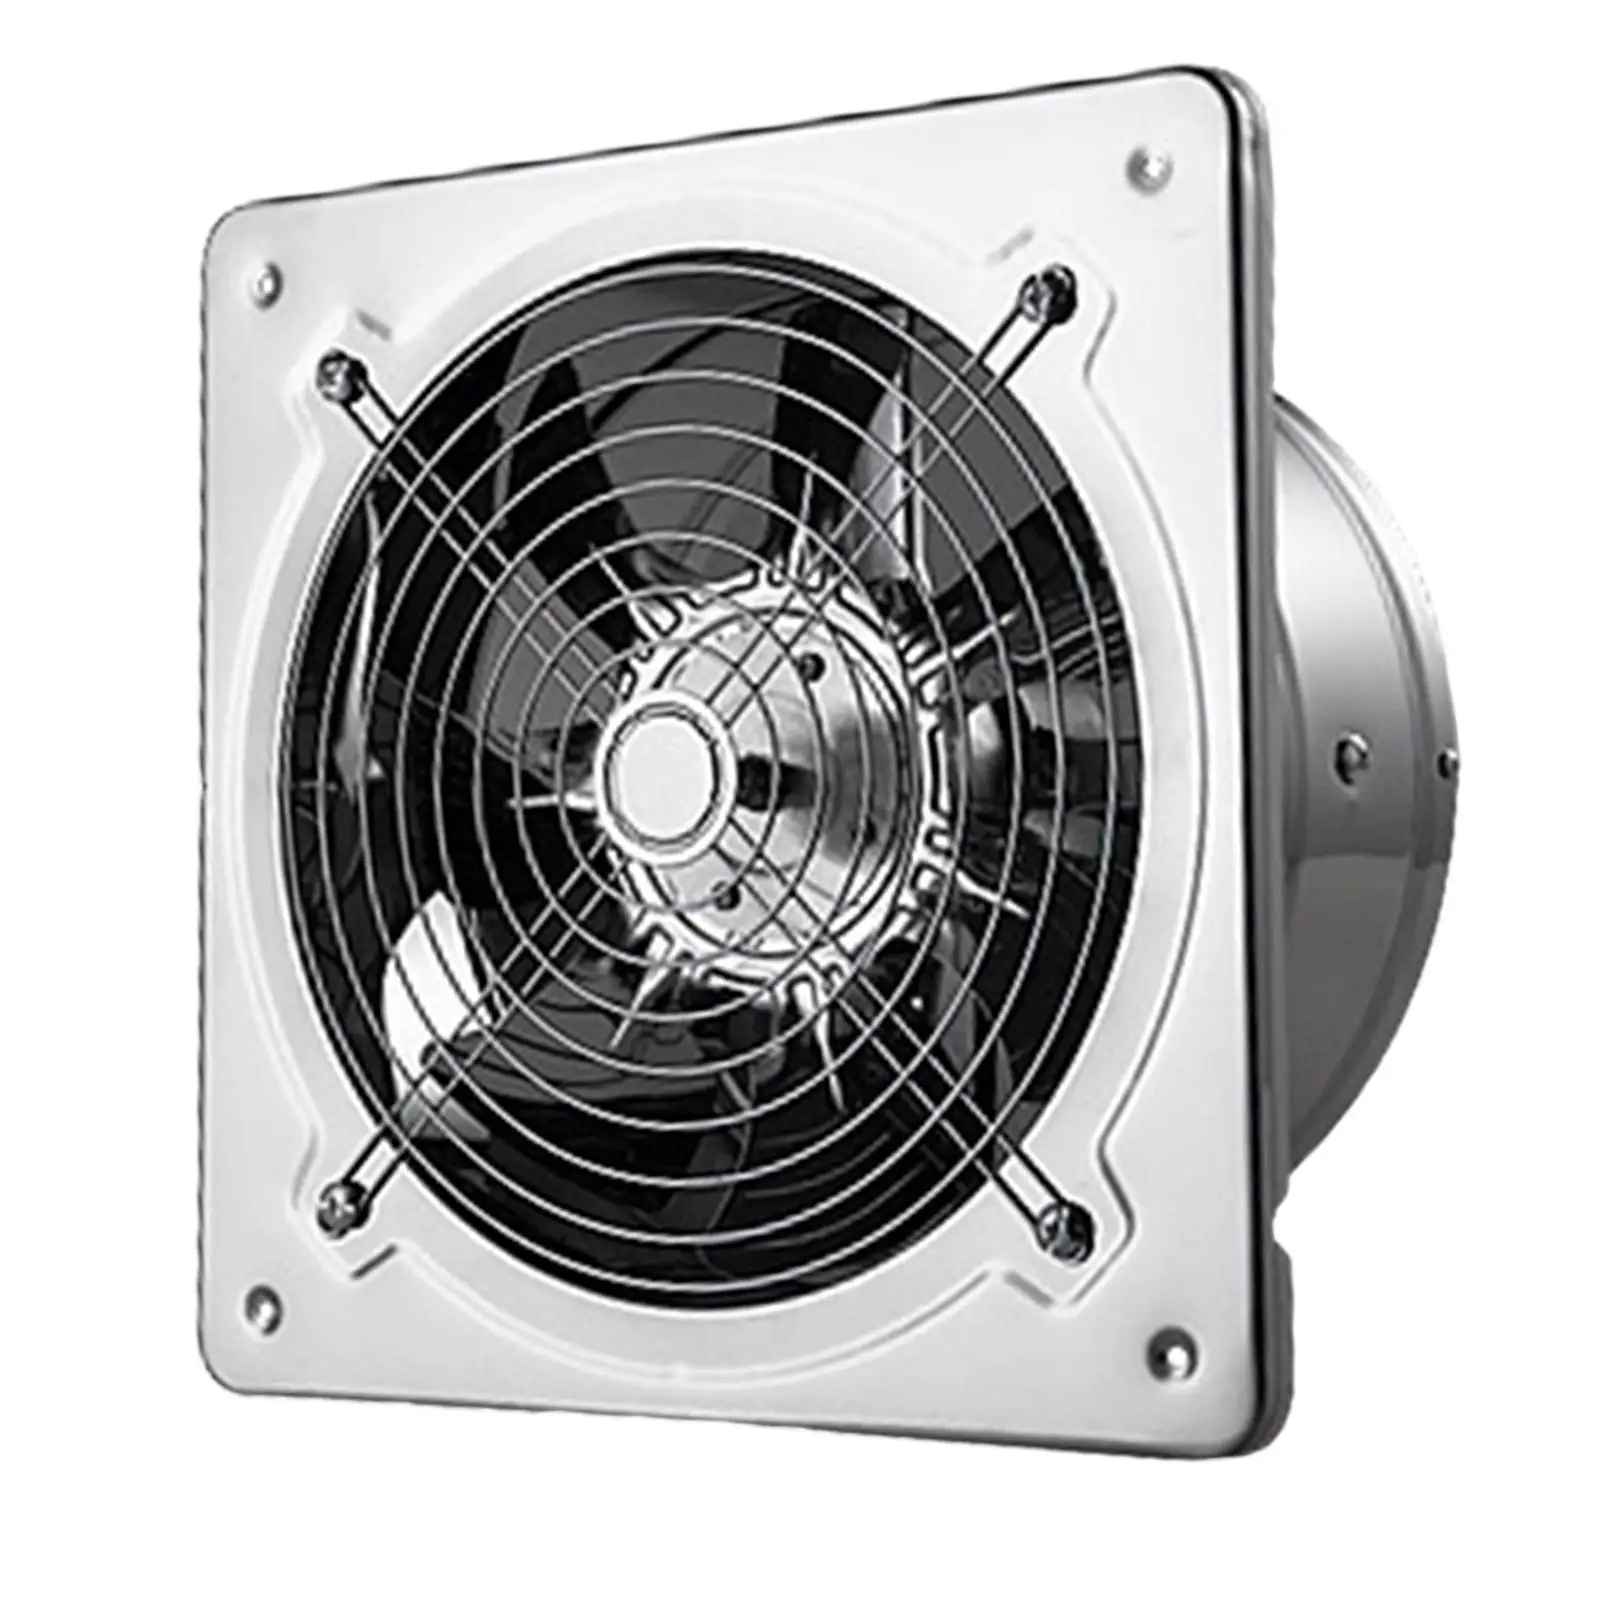 Ventilation Extractor Metal Square Blower through Wall Installation 40W Pipe Fan for Window Office Toilets Bathroom Laundry Room